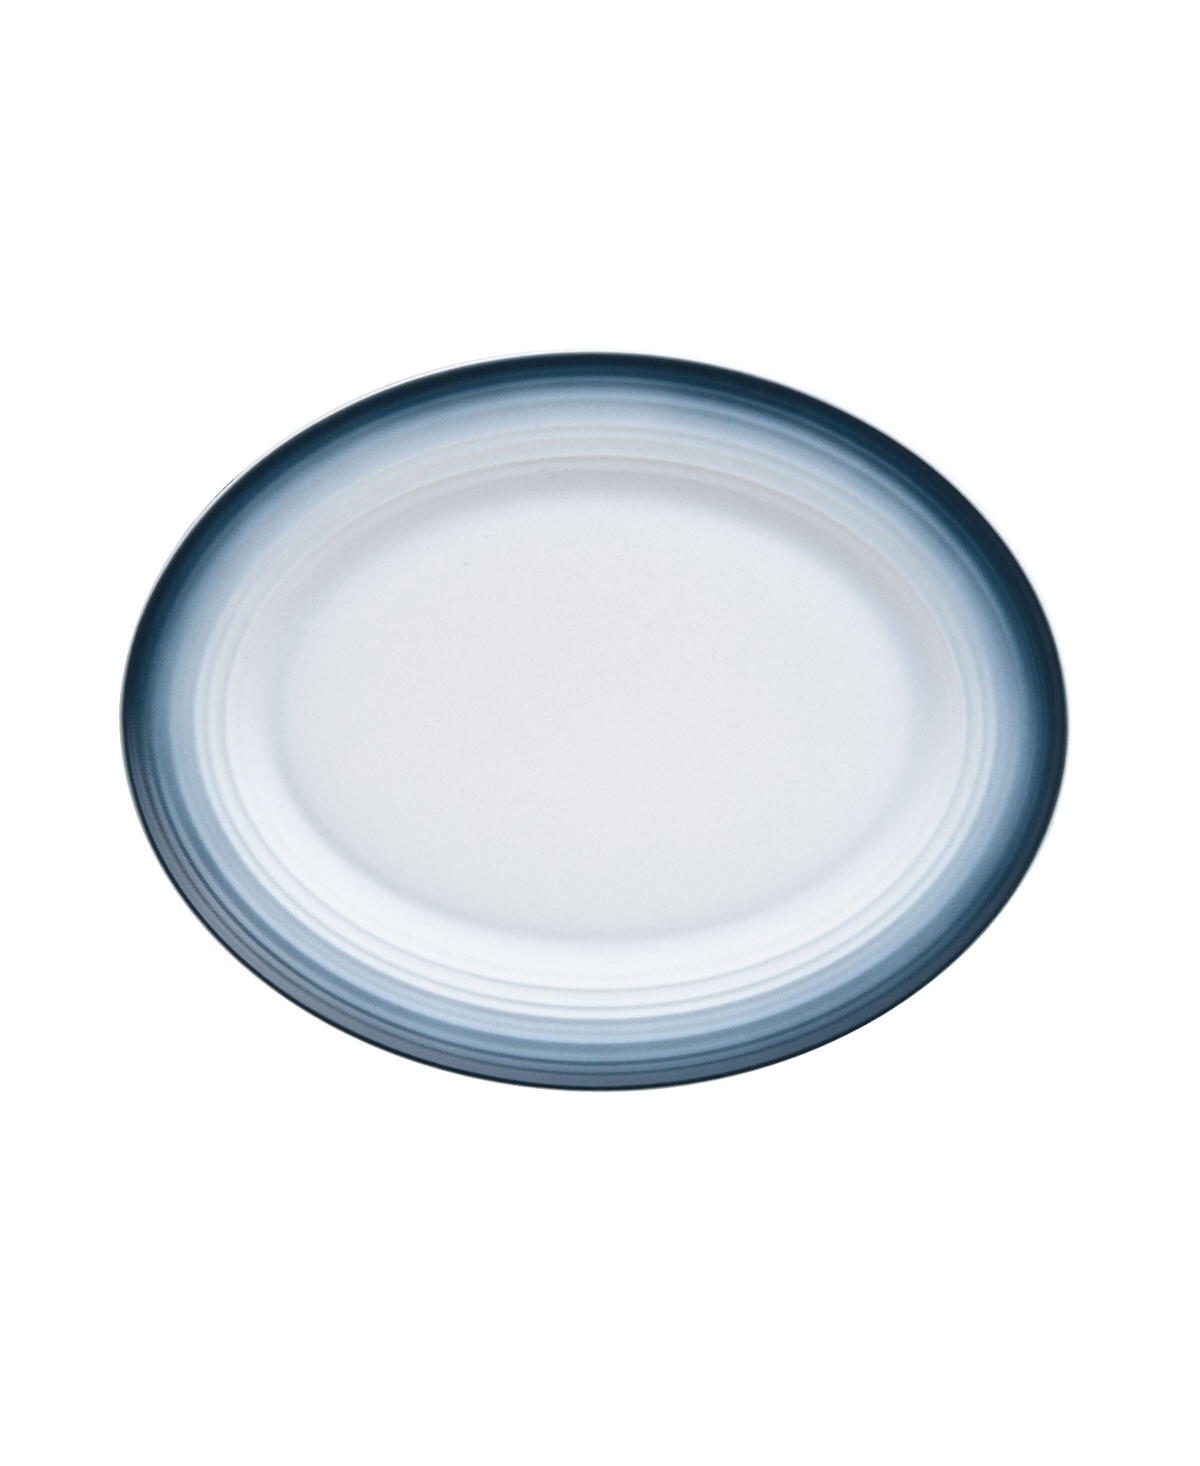 Mikasa Swirl 13.75" Oval Platter, Service For 1 In Blue